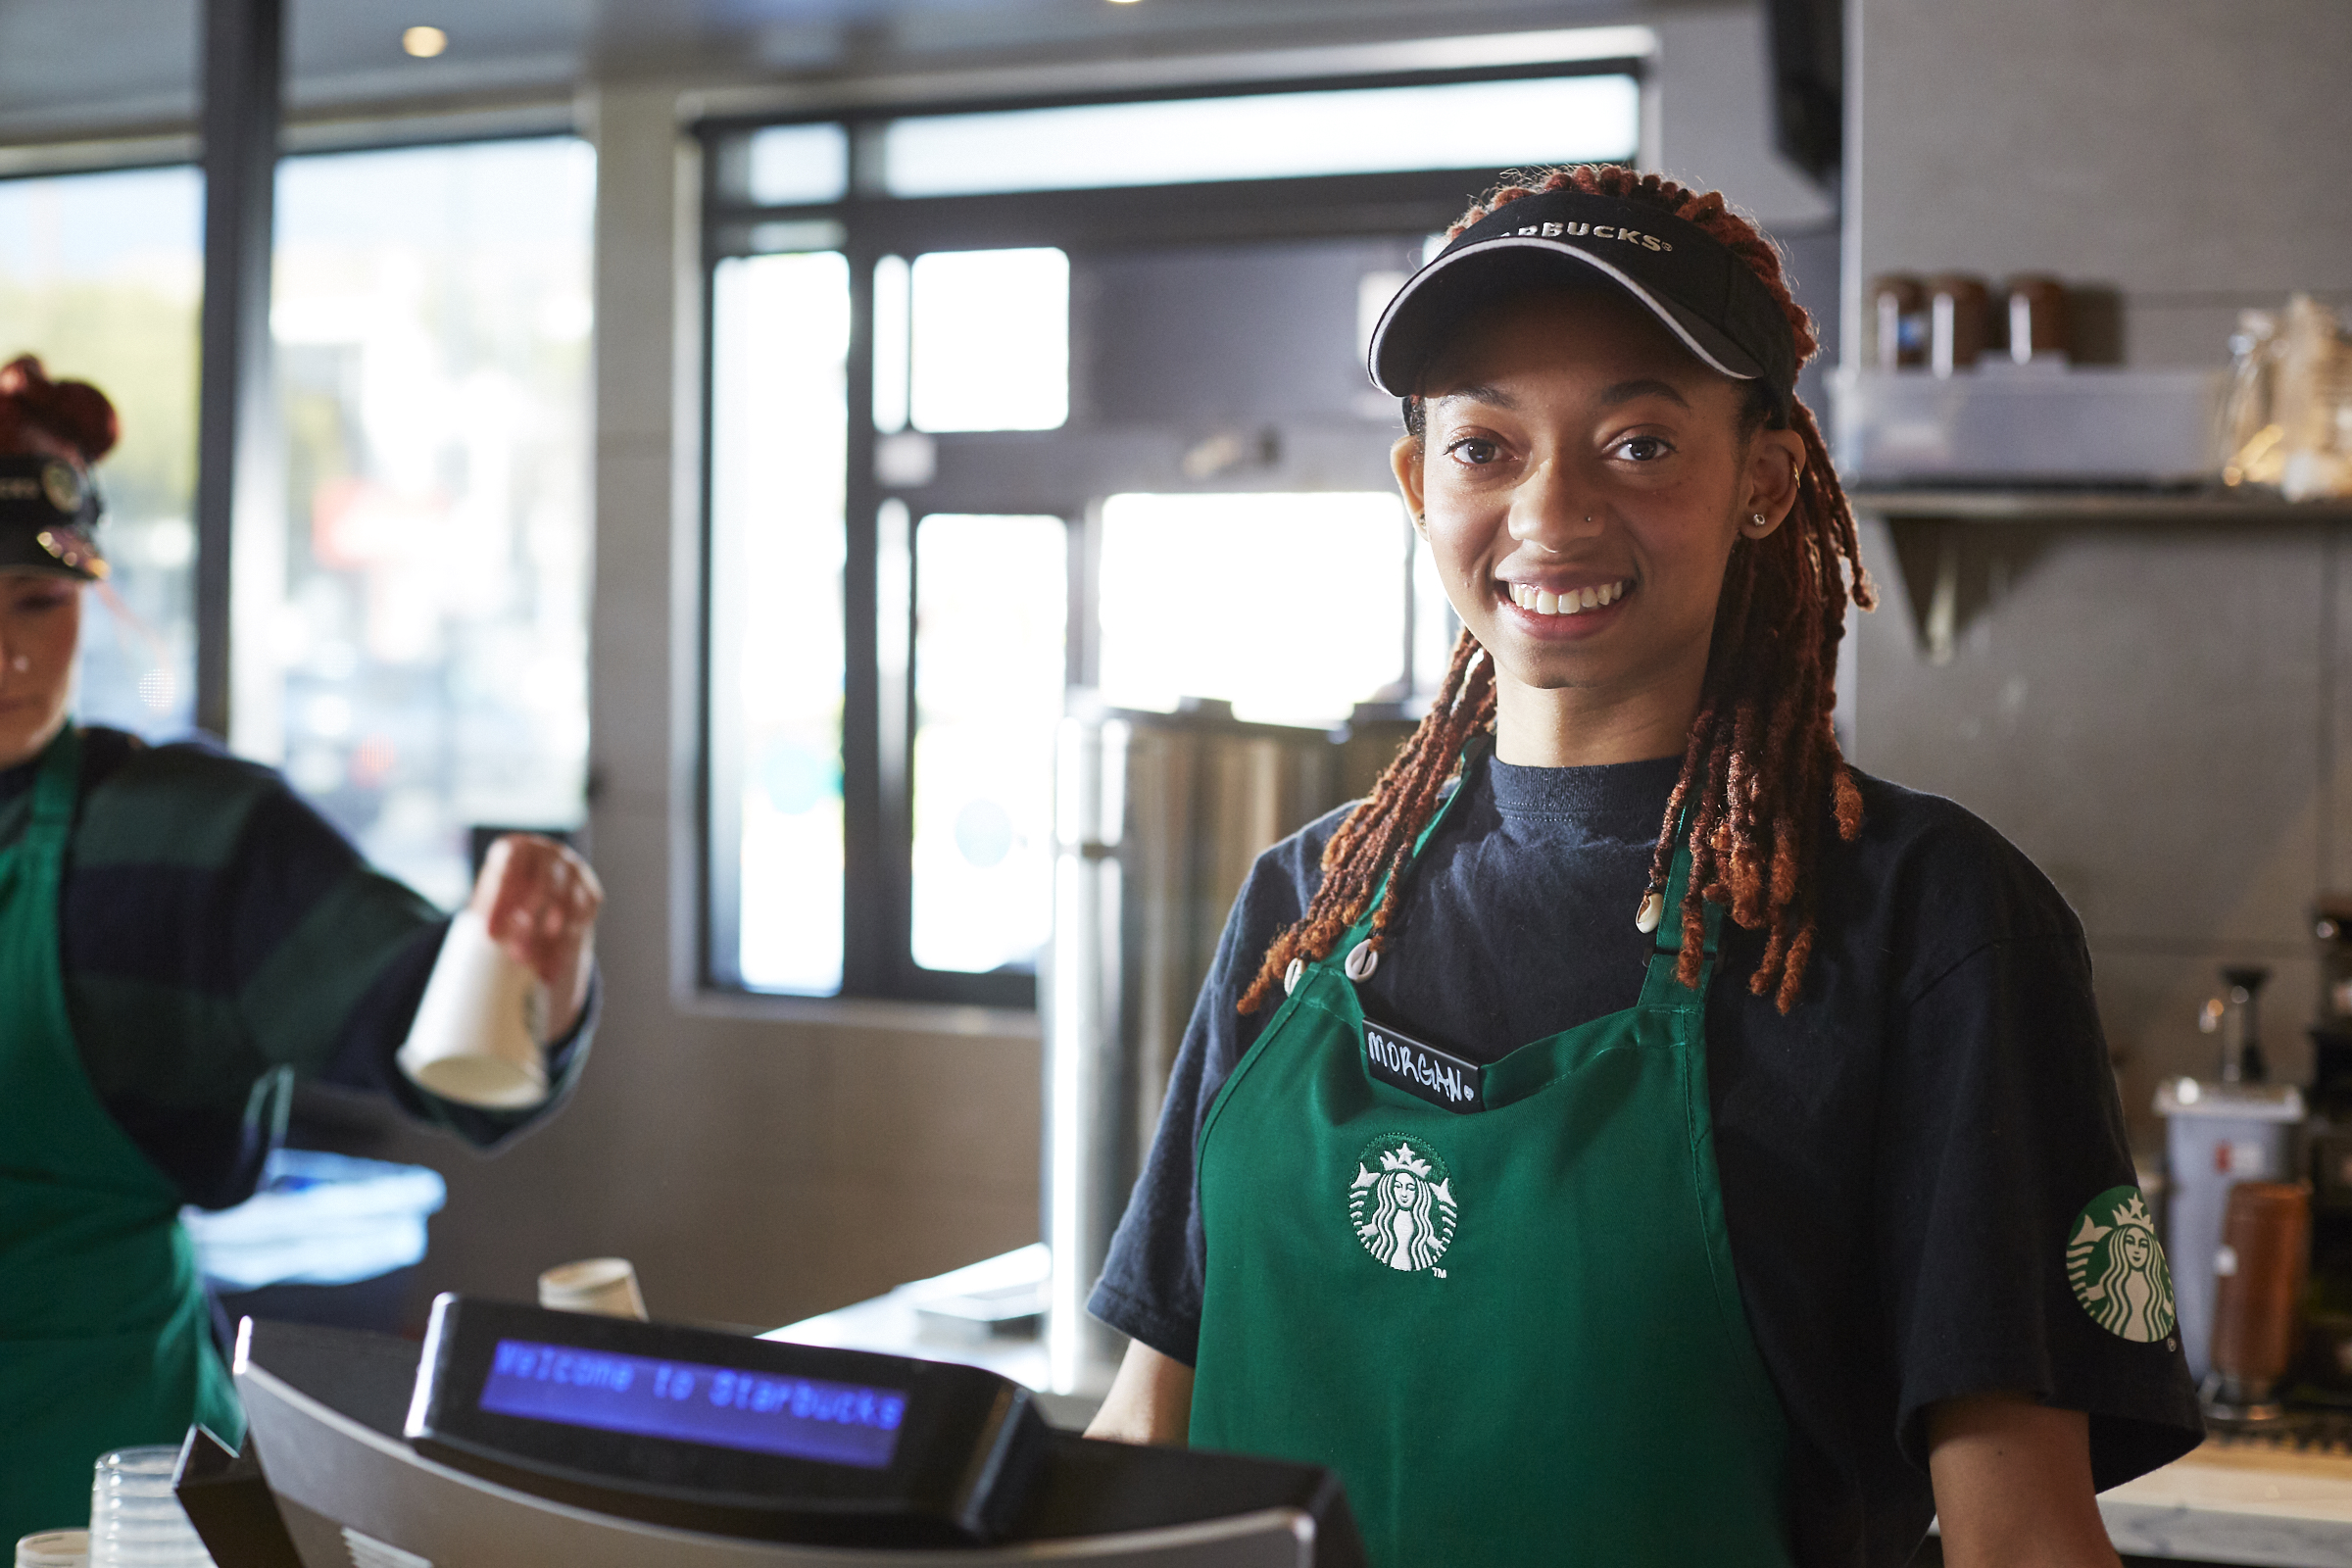 A Starbucks employee behind the counter in a store smiles while wearing a green apron and Starbucks visor.